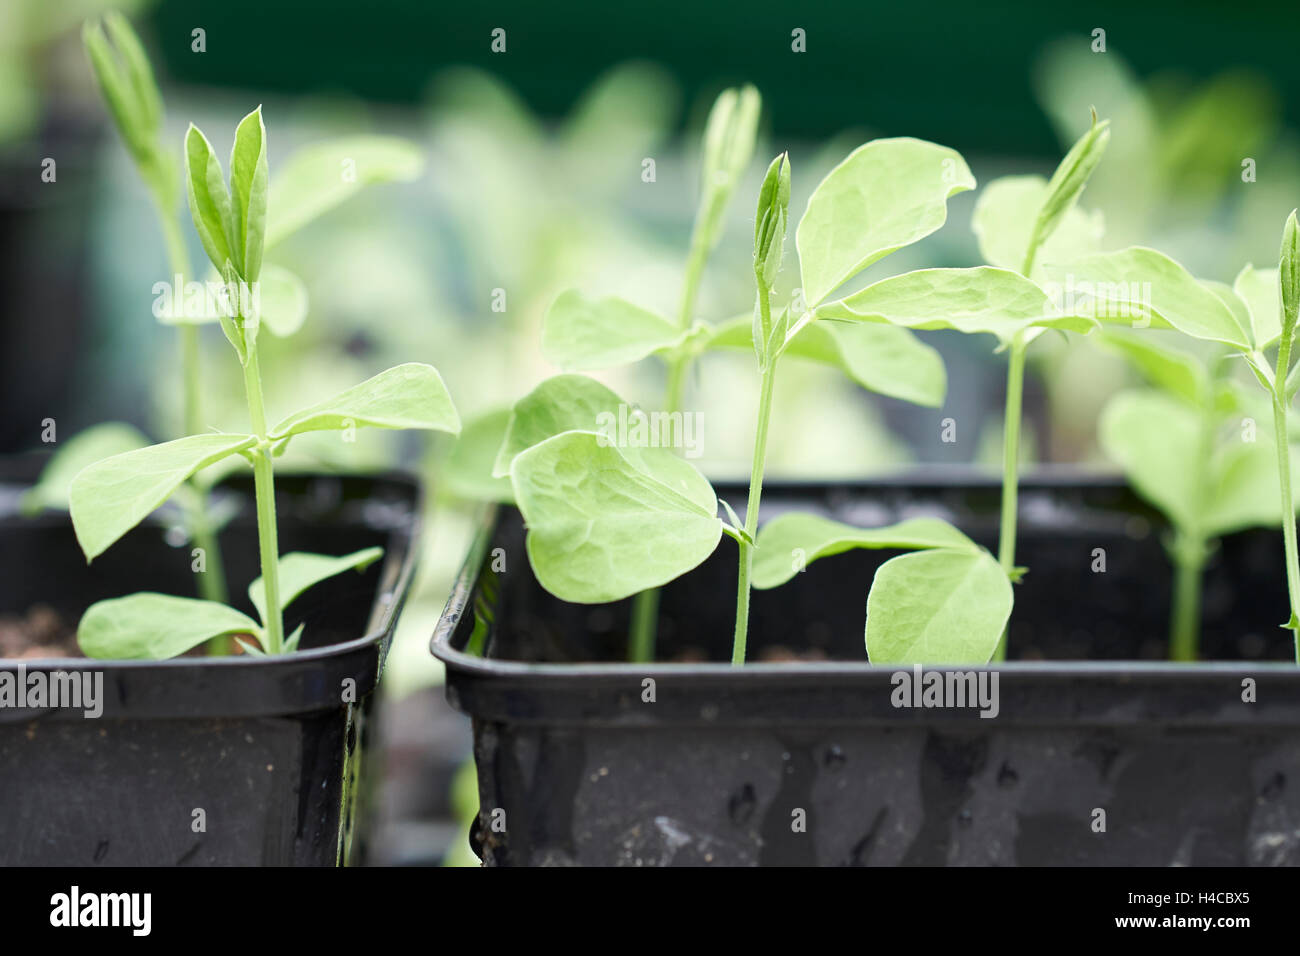 Sweet pea 'Old Spice' seedlings growing in plastic plant pots in a greenhouse, UK. Stock Photo